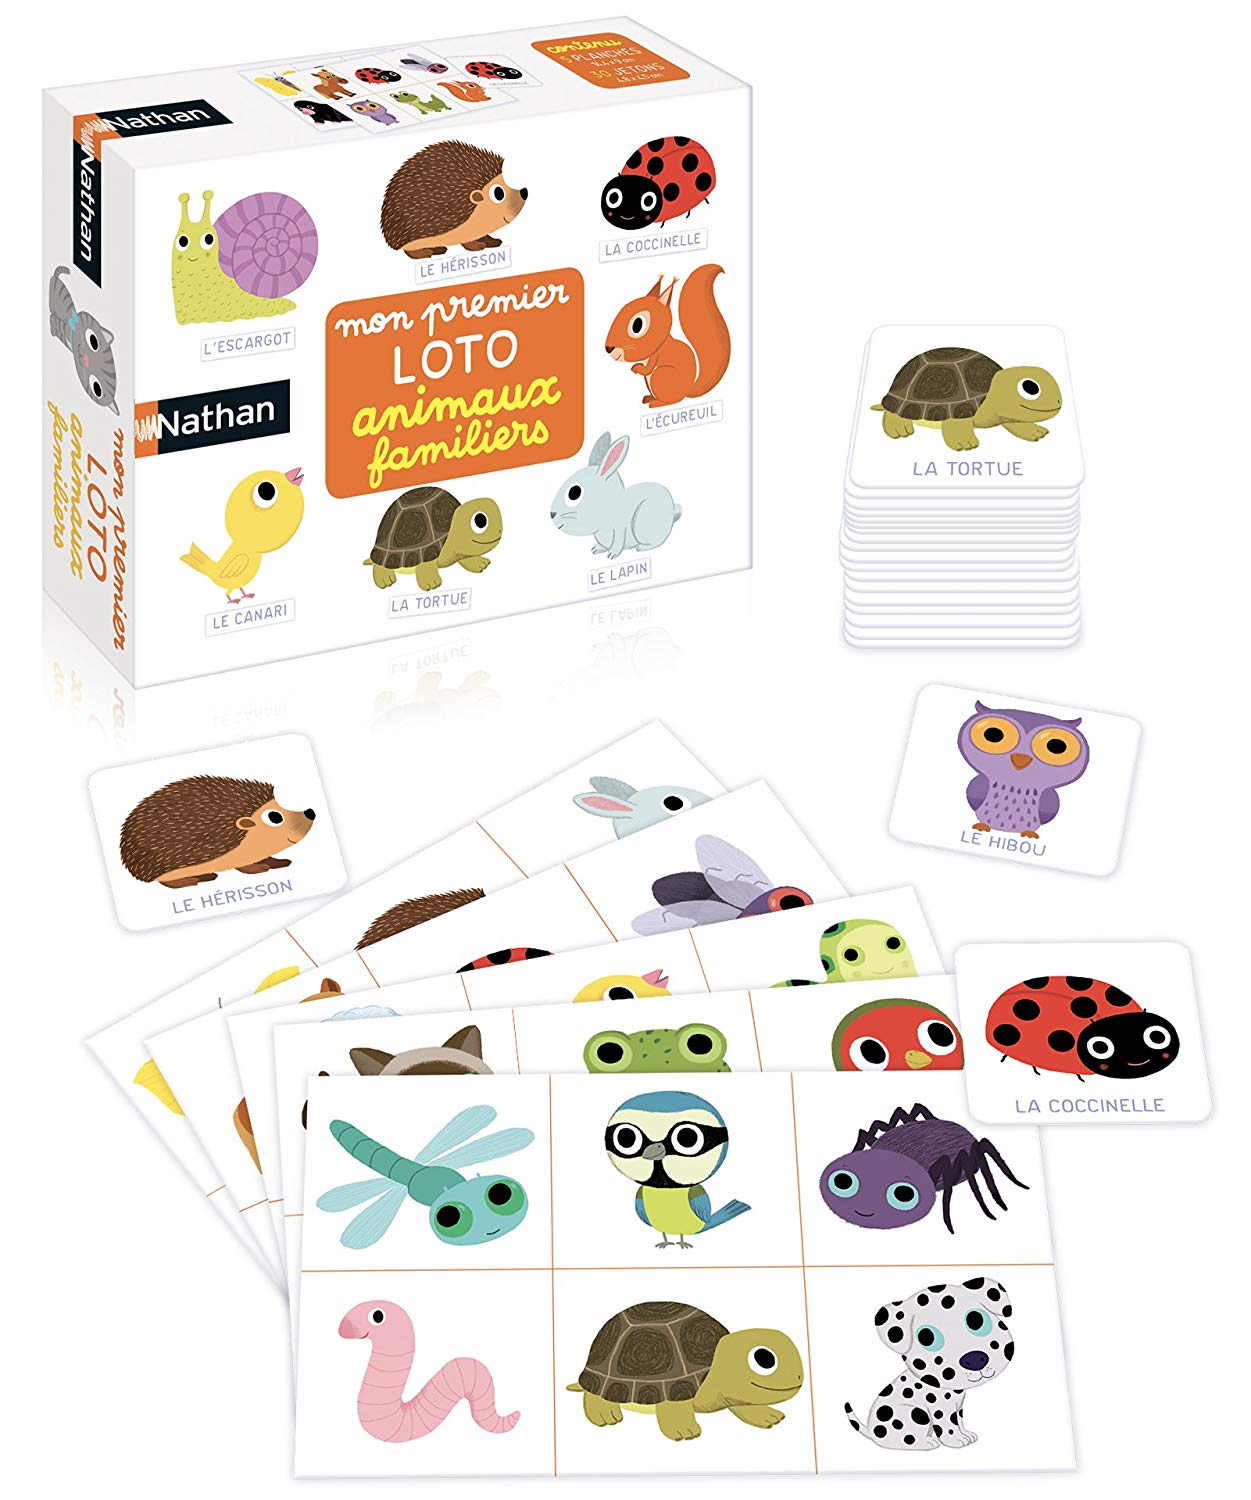 Nathan - 31151 - Mon loto animaux familiers